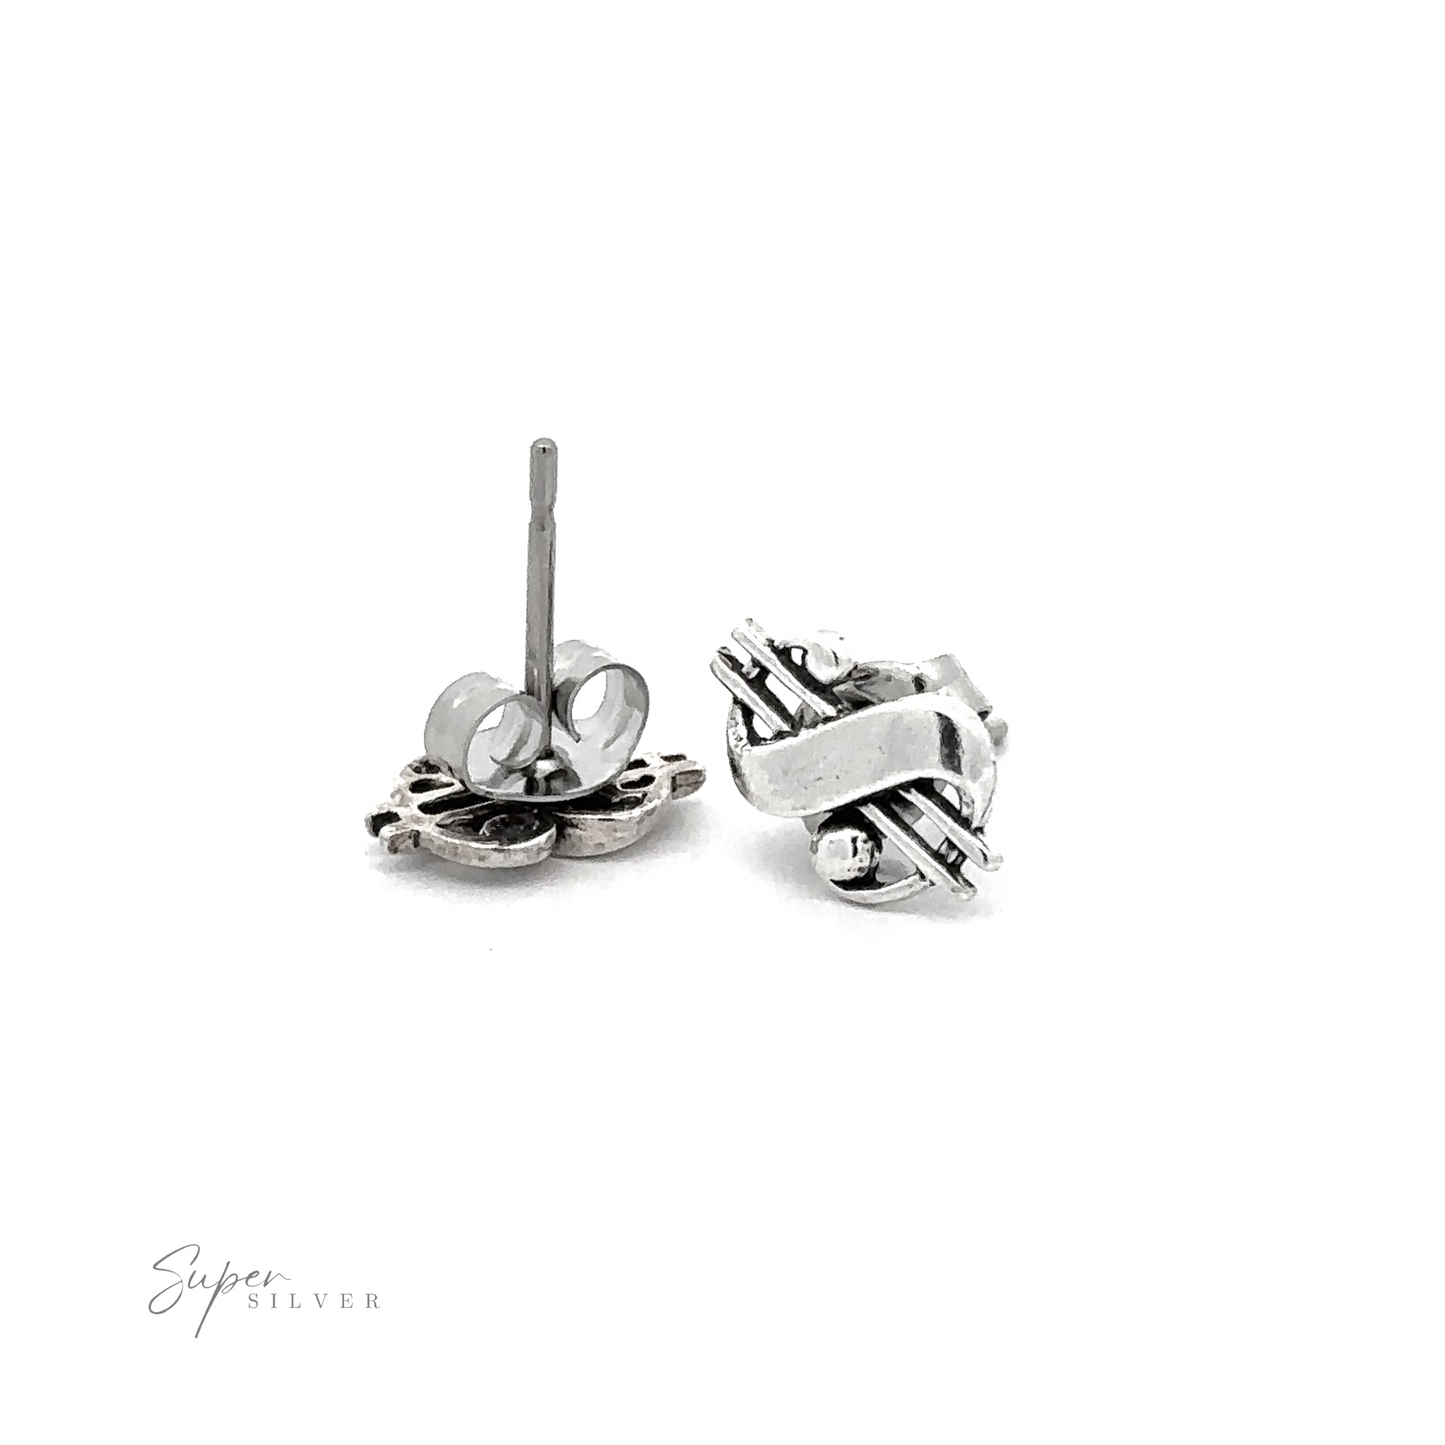 A pair of .925 Sterling Silver Dollar Sign Studs featuring dollar sign studs on a white background.